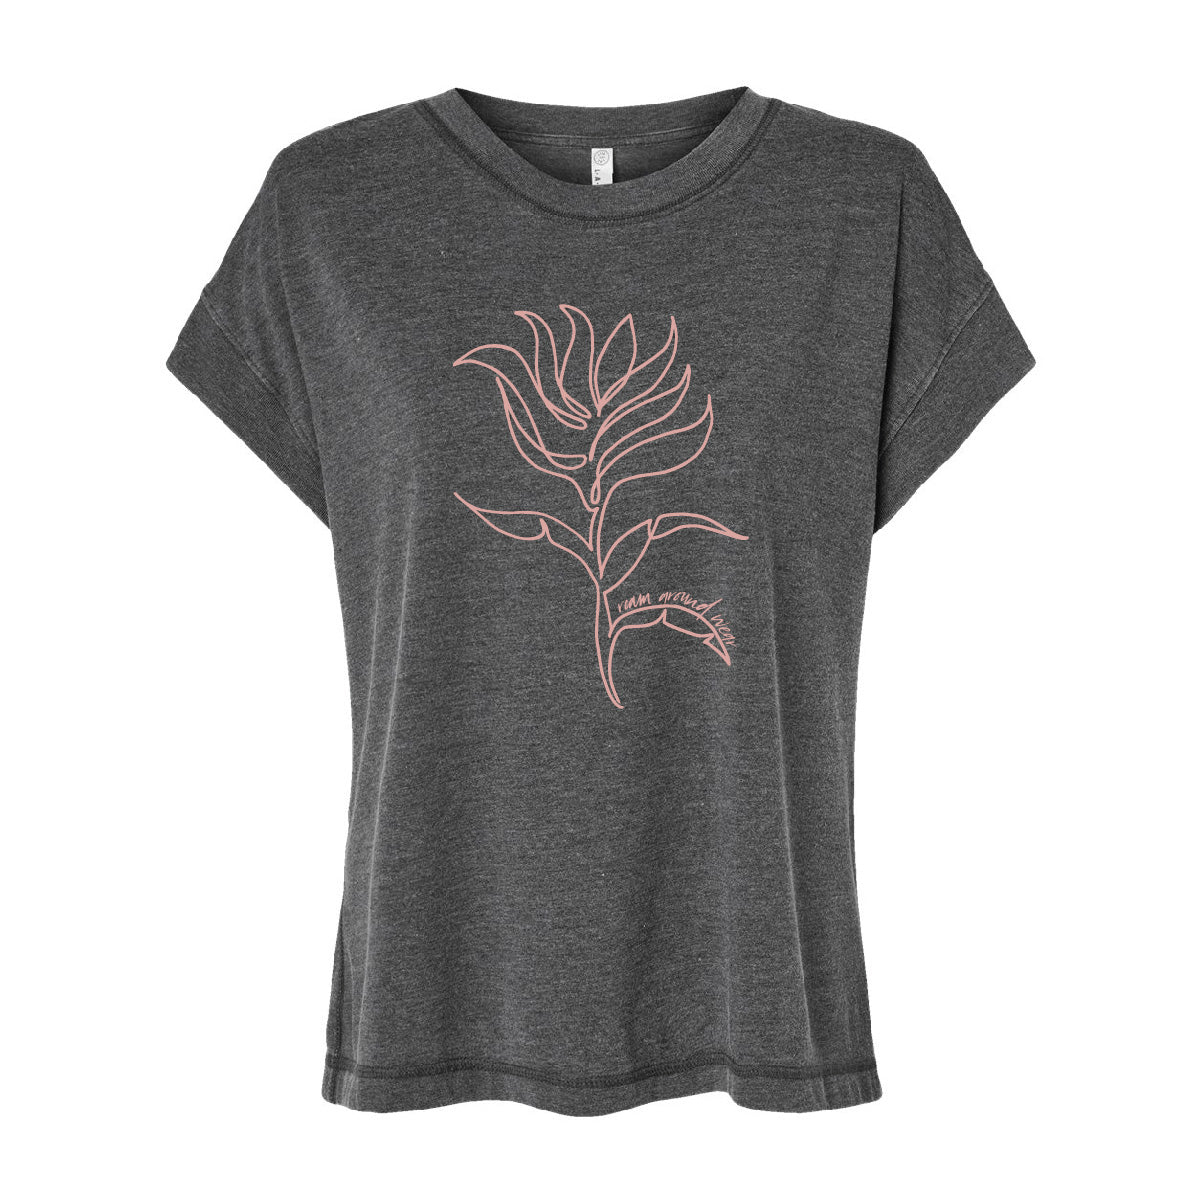 Roam Around Wear is a Wyoming t-shirt company based out of Gillette, Wyoming. Wyoming Indian Paintbrush Tee, Women's tee. Artisan designed. Roam Around Wear is a Wyoming t-shirt company based in Gillette, Wyoming